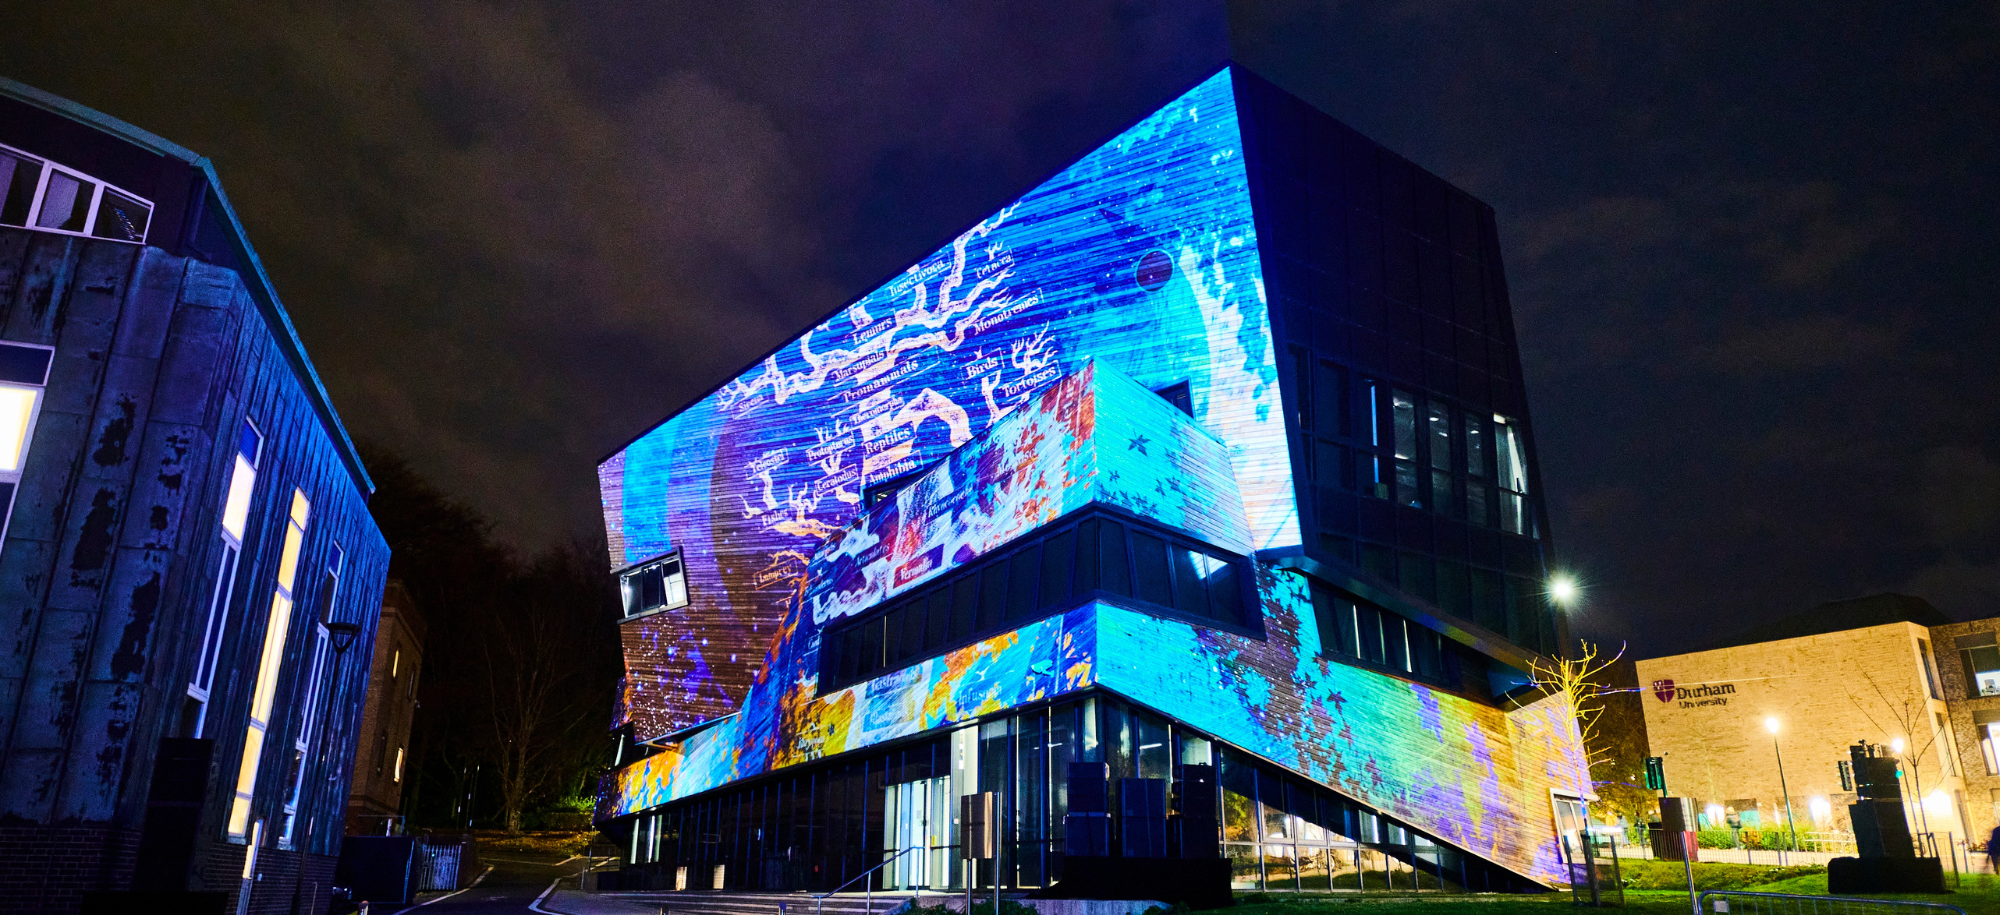 Night time image from Lumiere 2021 showing the Ogden building with colourful abstract images projected onto one side